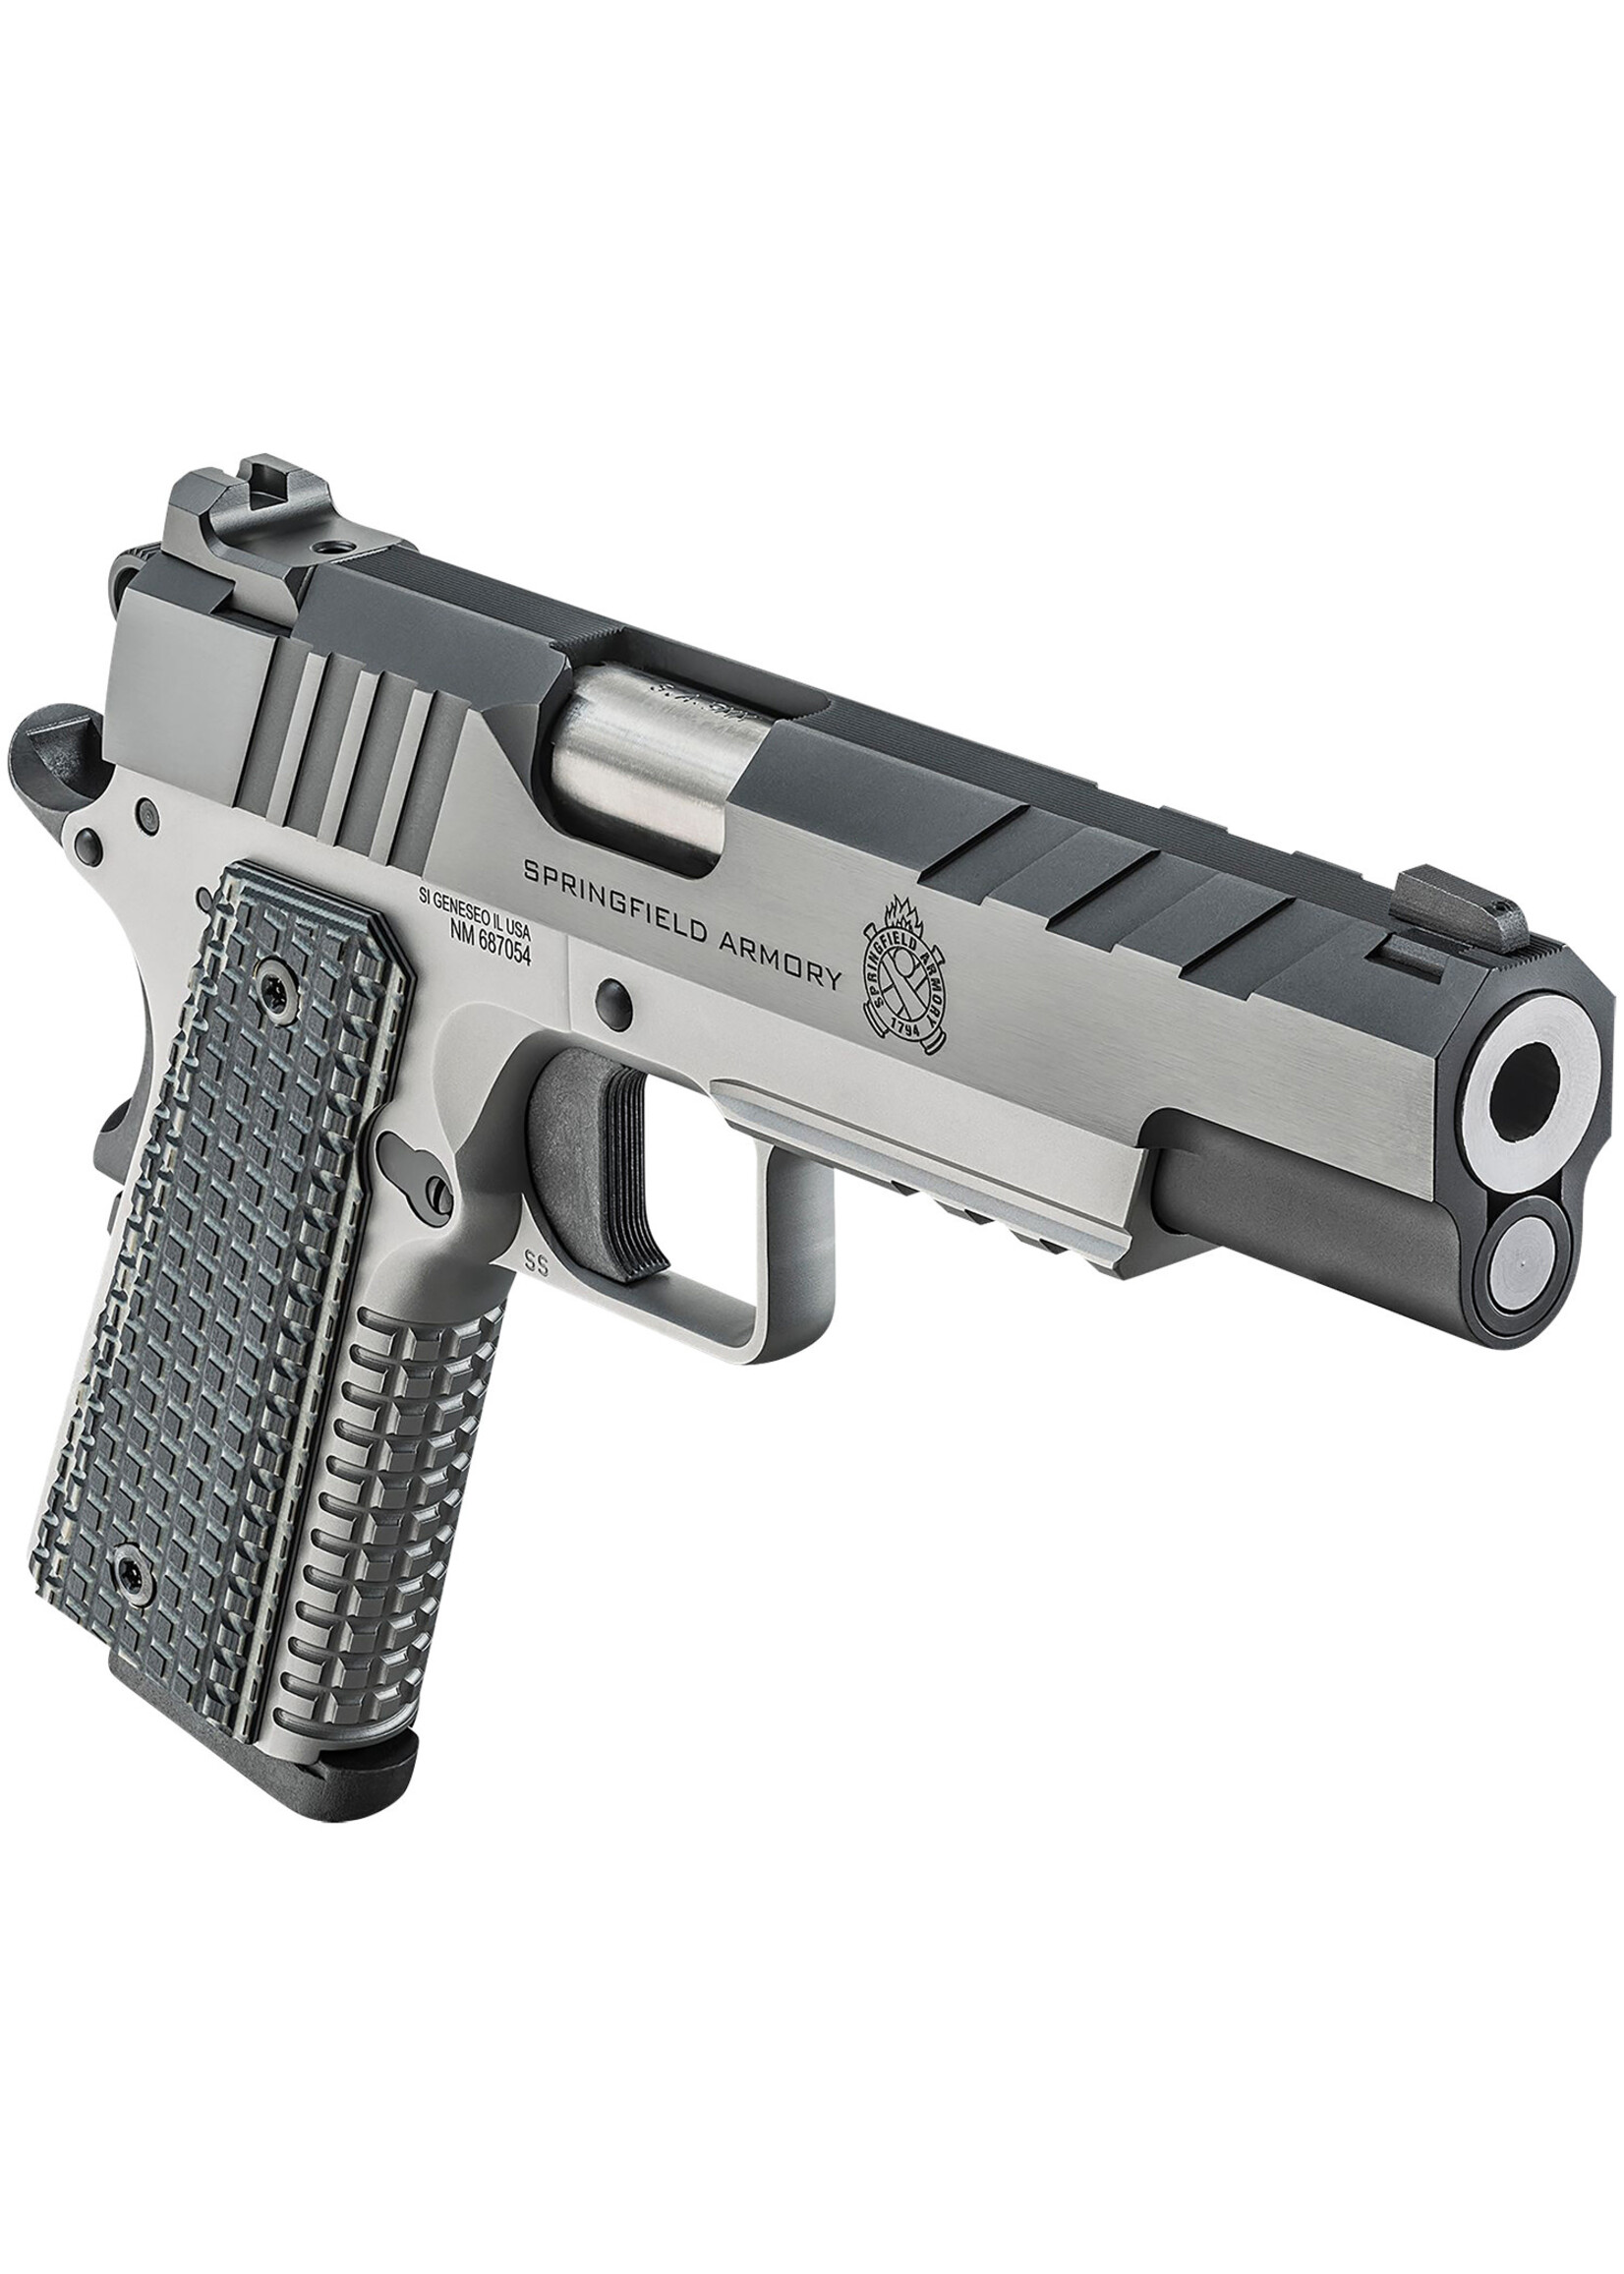 Springfield Armory Springfield Armory PX9219L 1911 Emissary 9mm Luger 9+1, 5" Stainless Match Grade Bull Steel Barrel, Blued/Stainless Serrated/Tri-Top Cut Steel Slide, Stainless Steel Frame w/Beavertail & Picatinny Rail, Black VZ Thin-Line G10 Grip, Right Hand